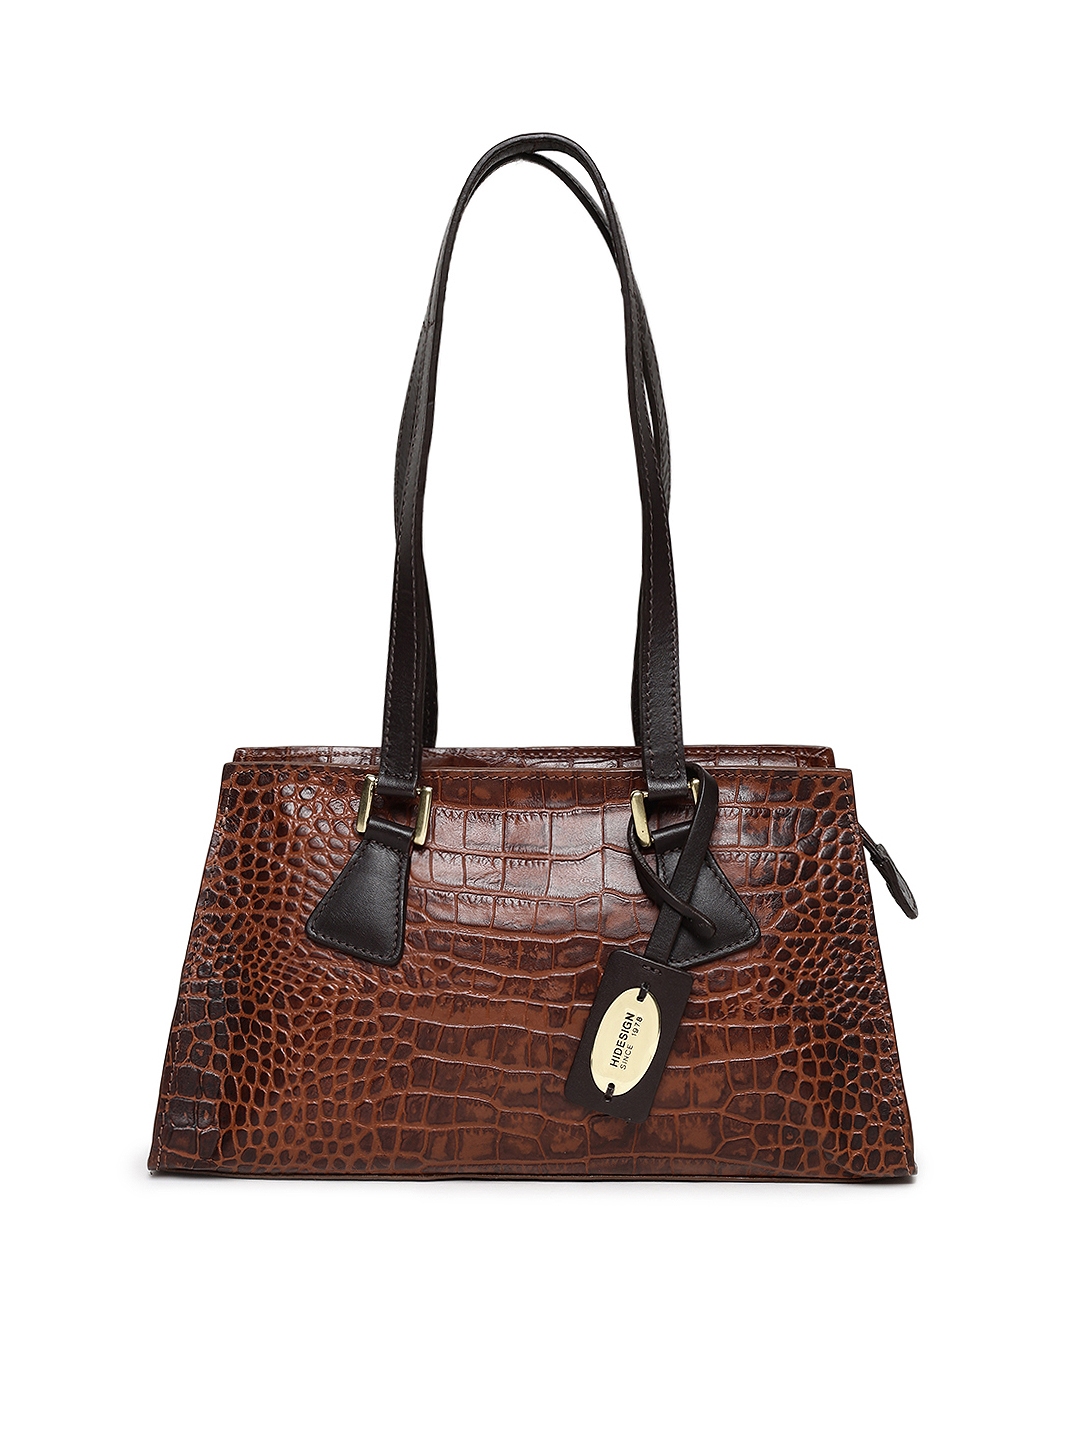 Leather Bag - Buy Leather Bags for Men & Women Online | Myntra